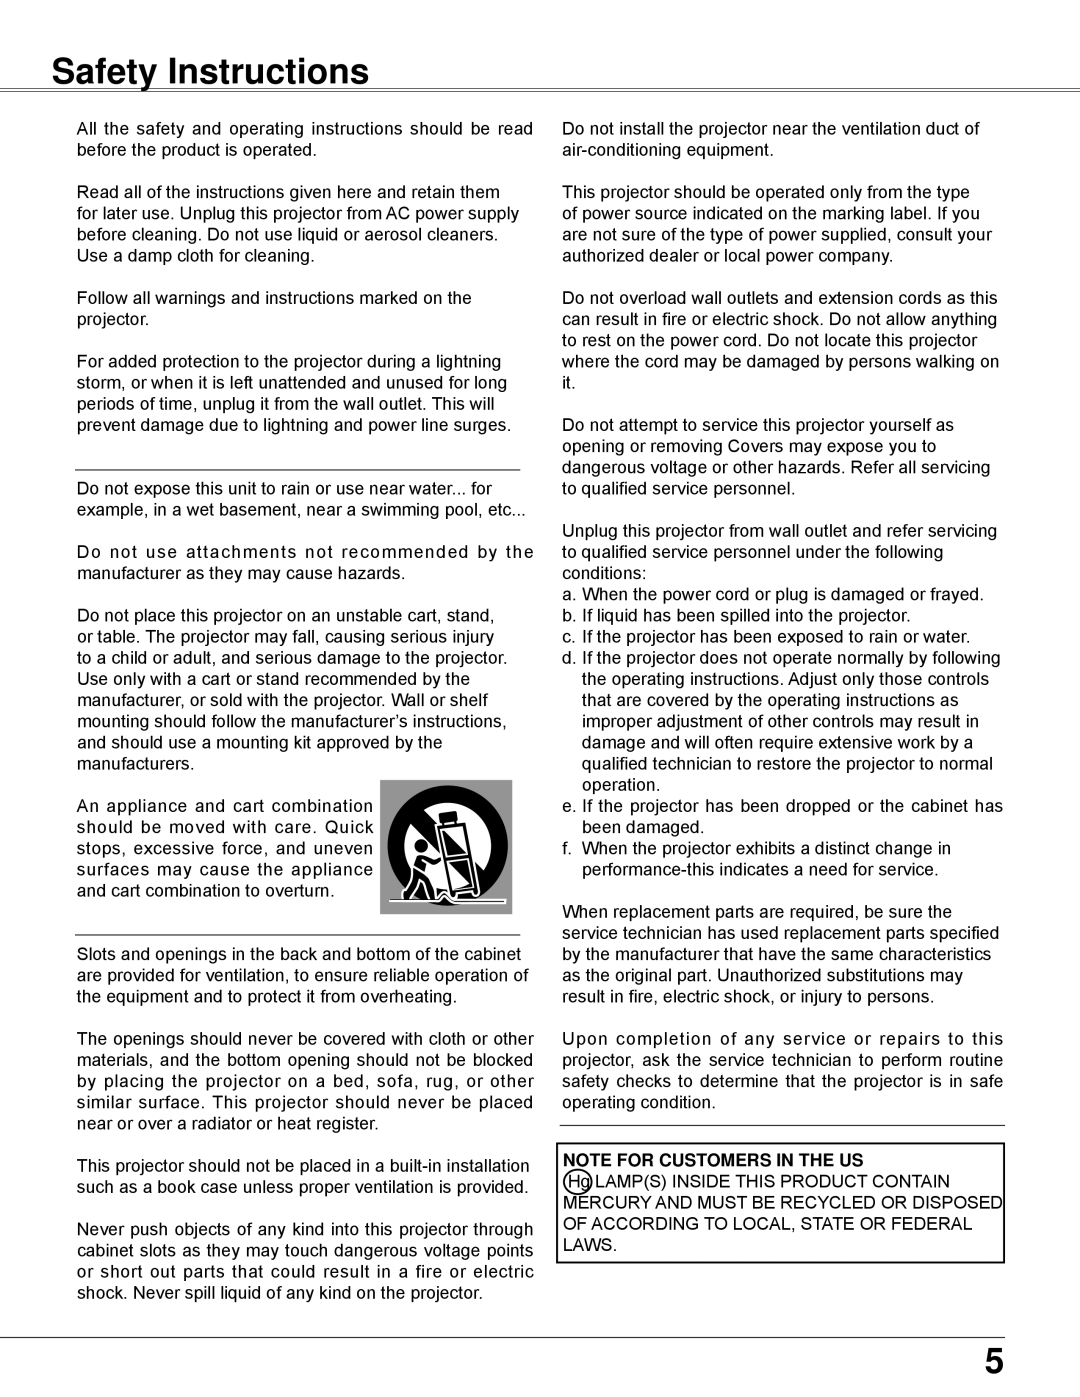 Eiki LC-WB42N owner manual Safety Instructions, Note For Customers In The Us 